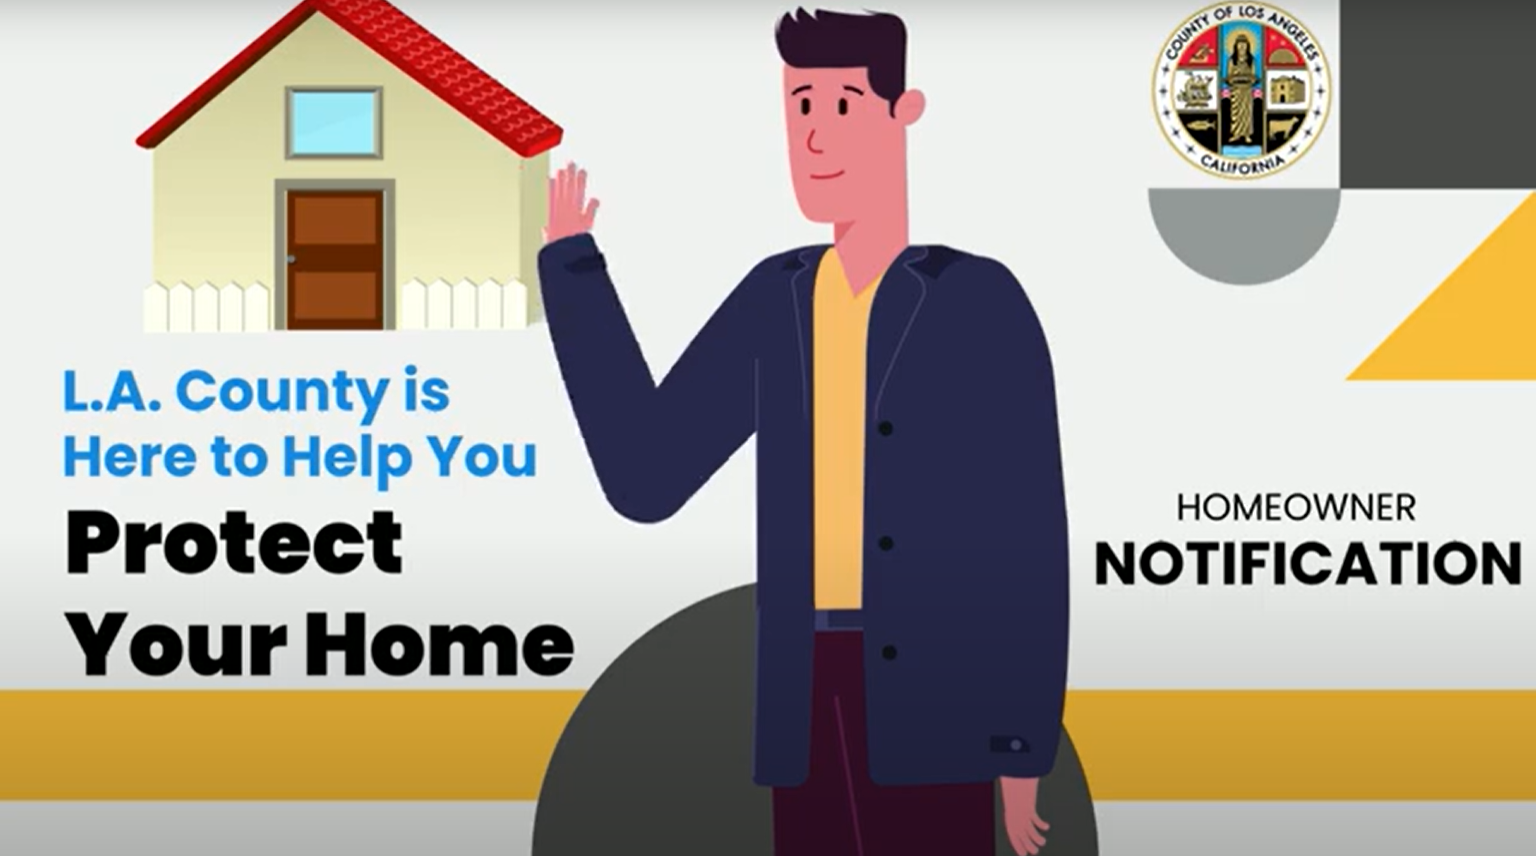 L.A. County is Here to Help You Protect Your Home with the Homeowner Notification Program